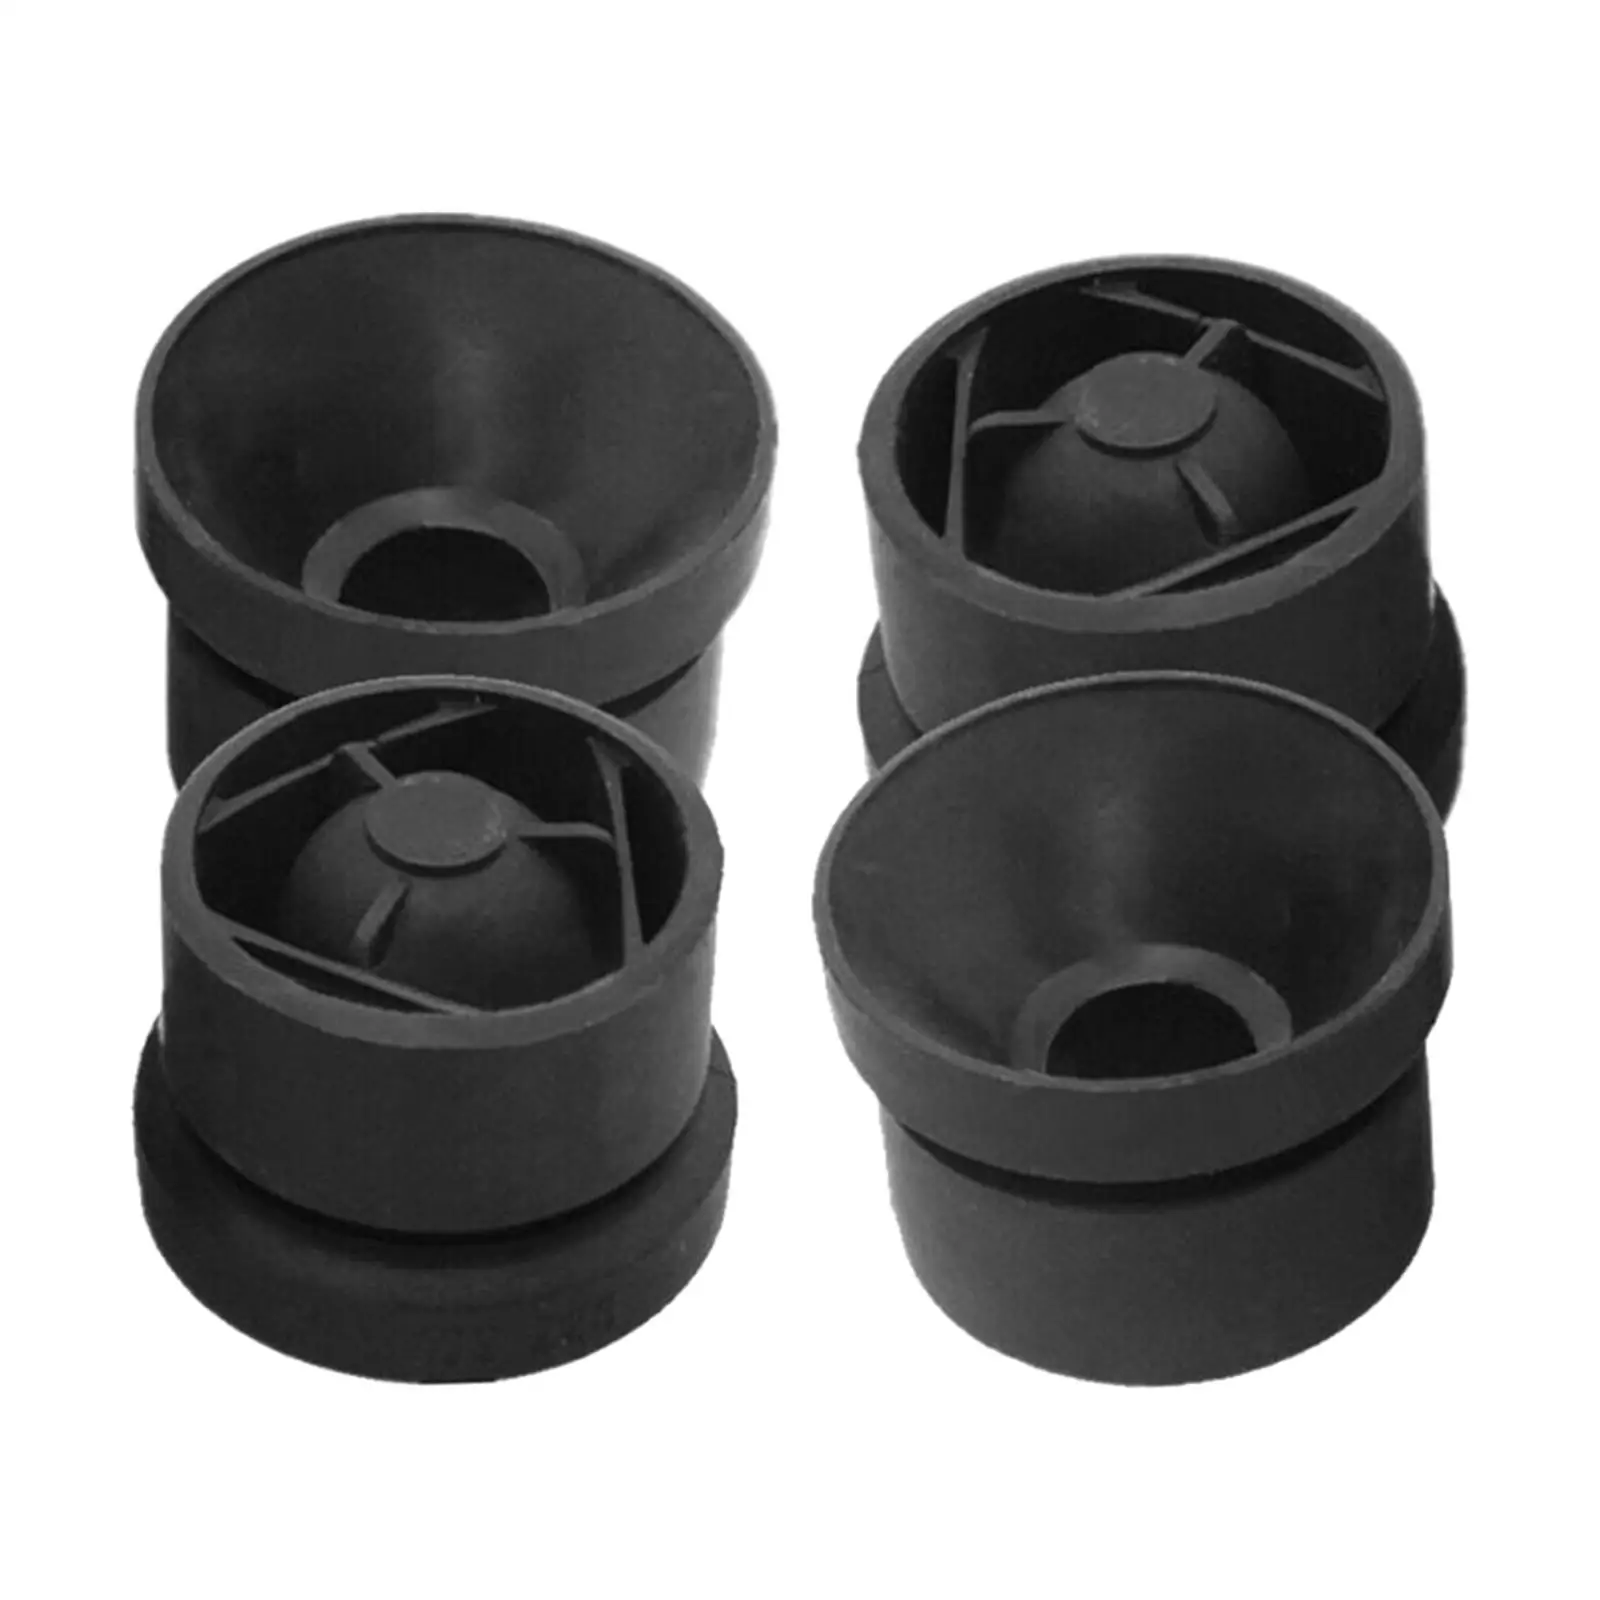 

4 Pieces Auto Engine Cover Mounting Rubber Grommet Stop 06A103226 Black for Leon Replace Parts Durable